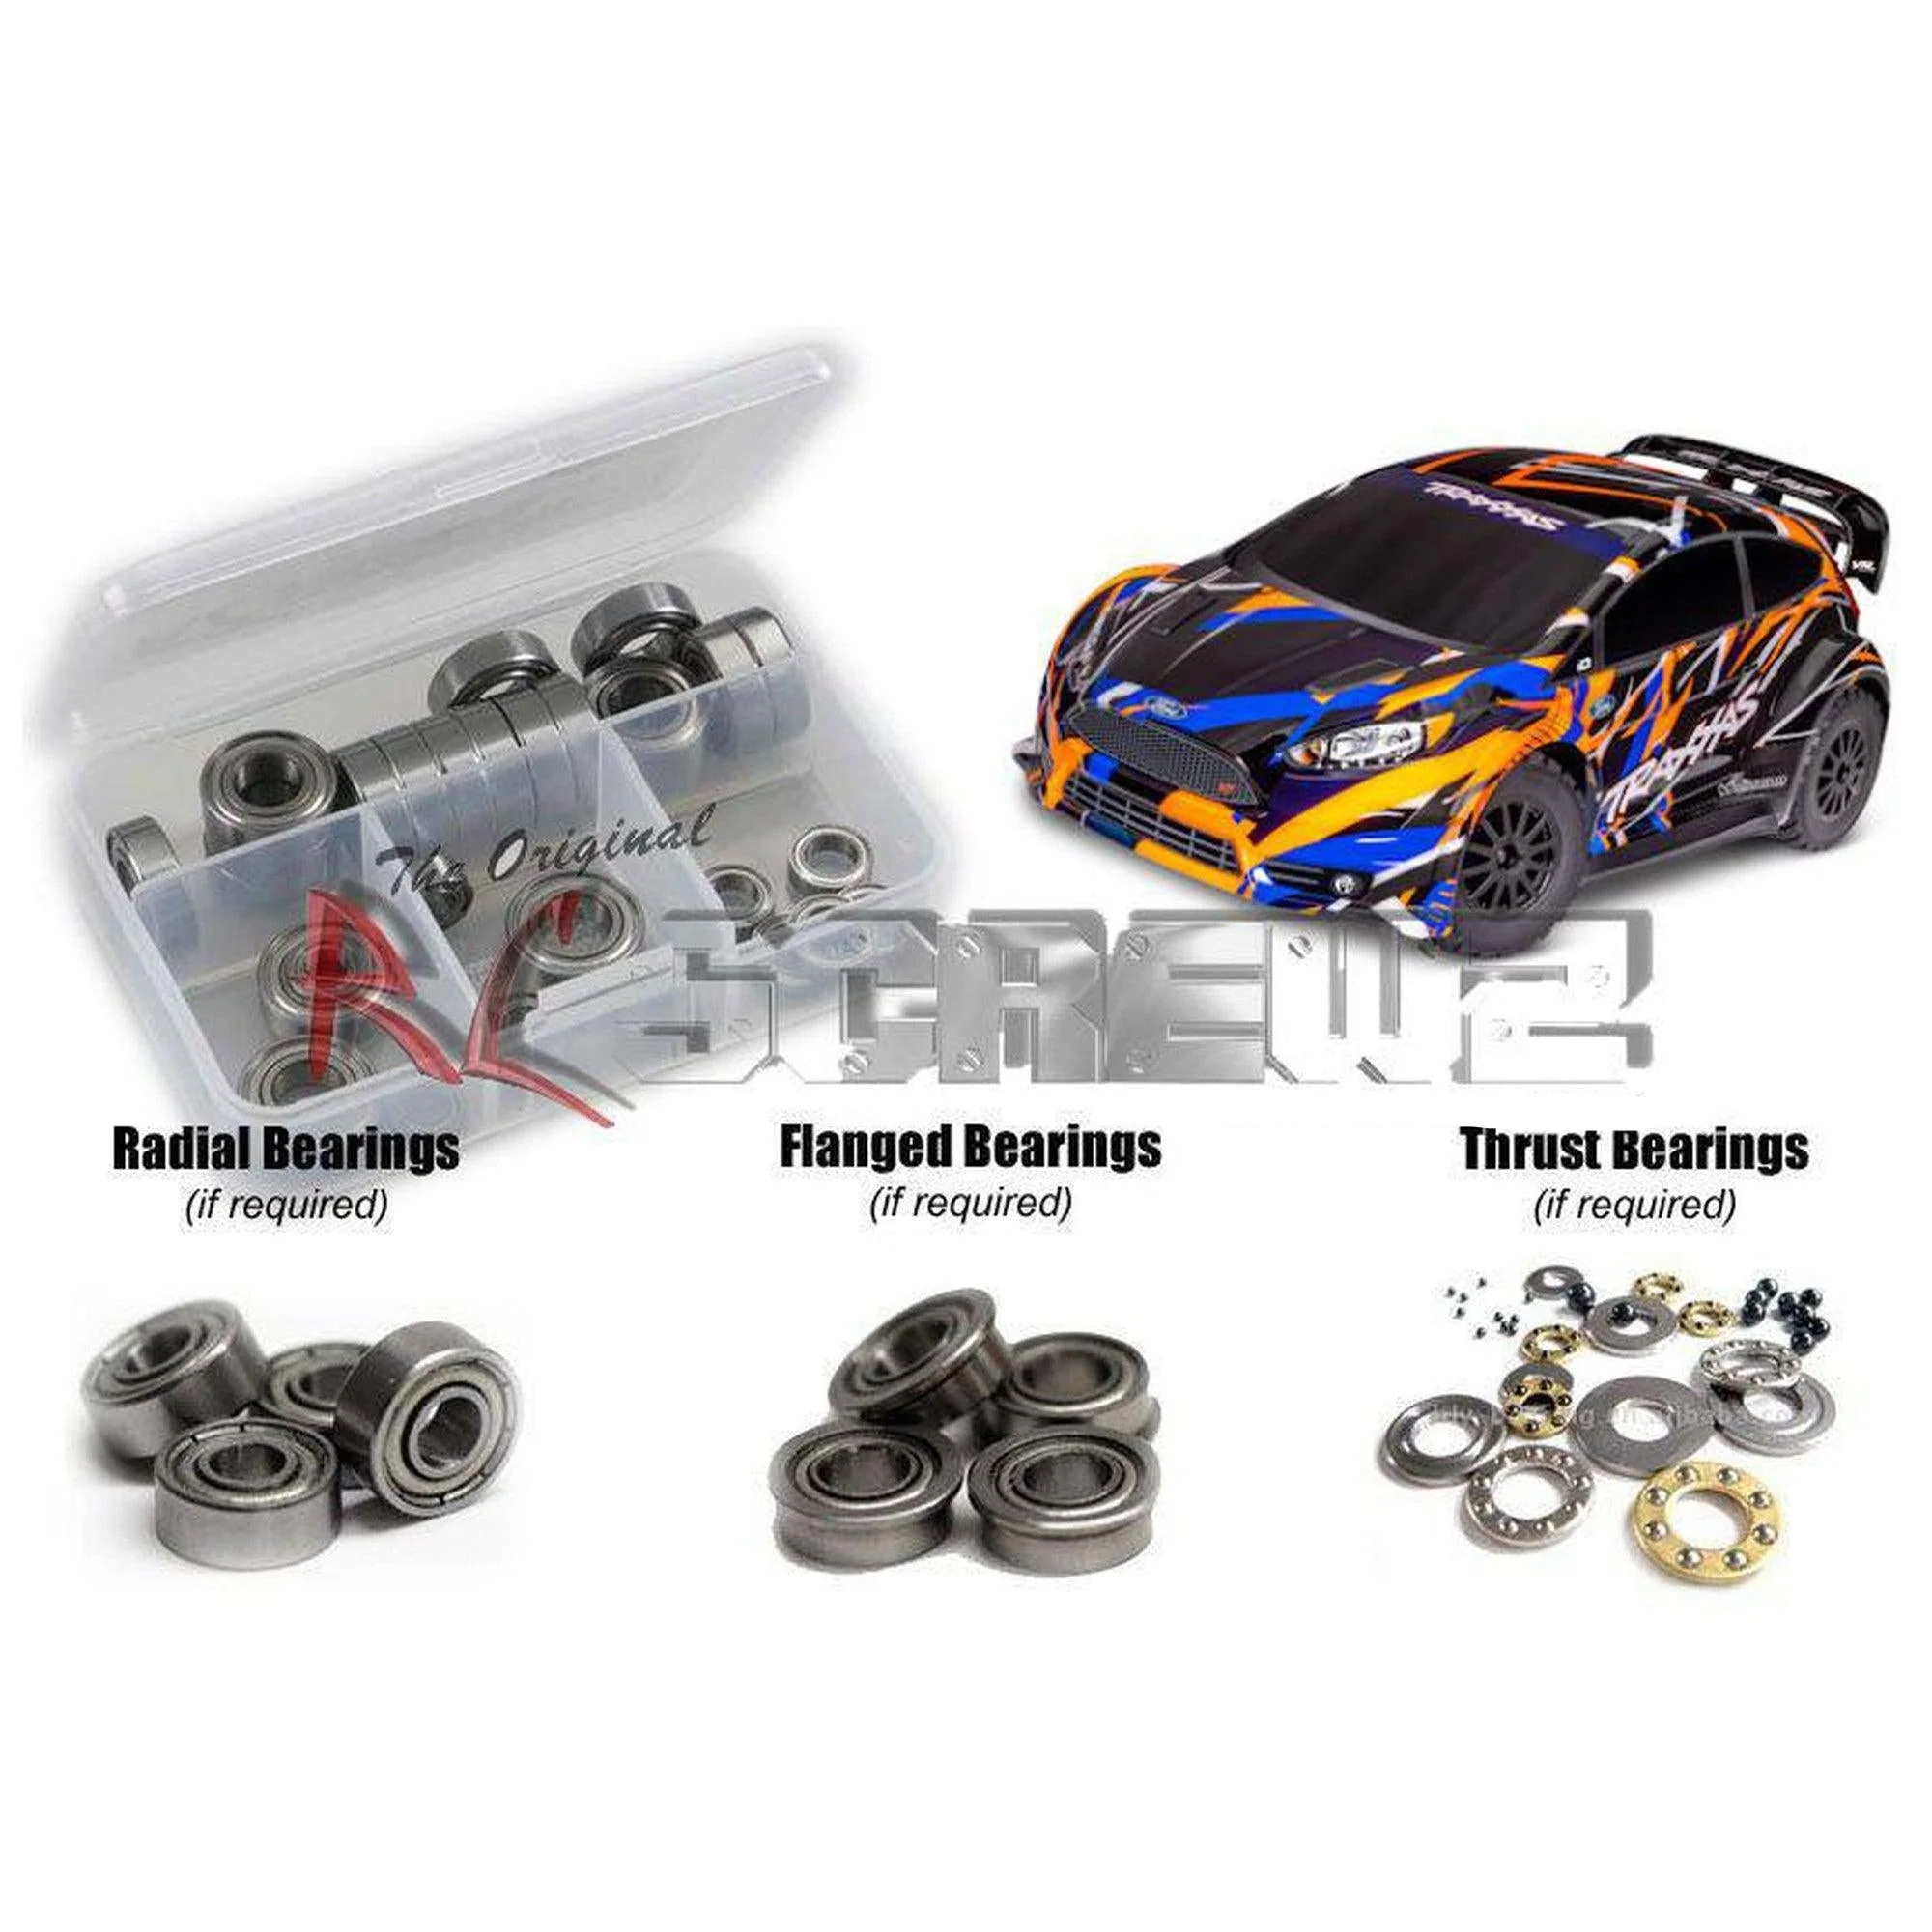 RCScrewZ Metal Shielded Bearing Kit tra122b for Traxxas Ford Fiesta ST Rally VXL - Picture 1 of 12